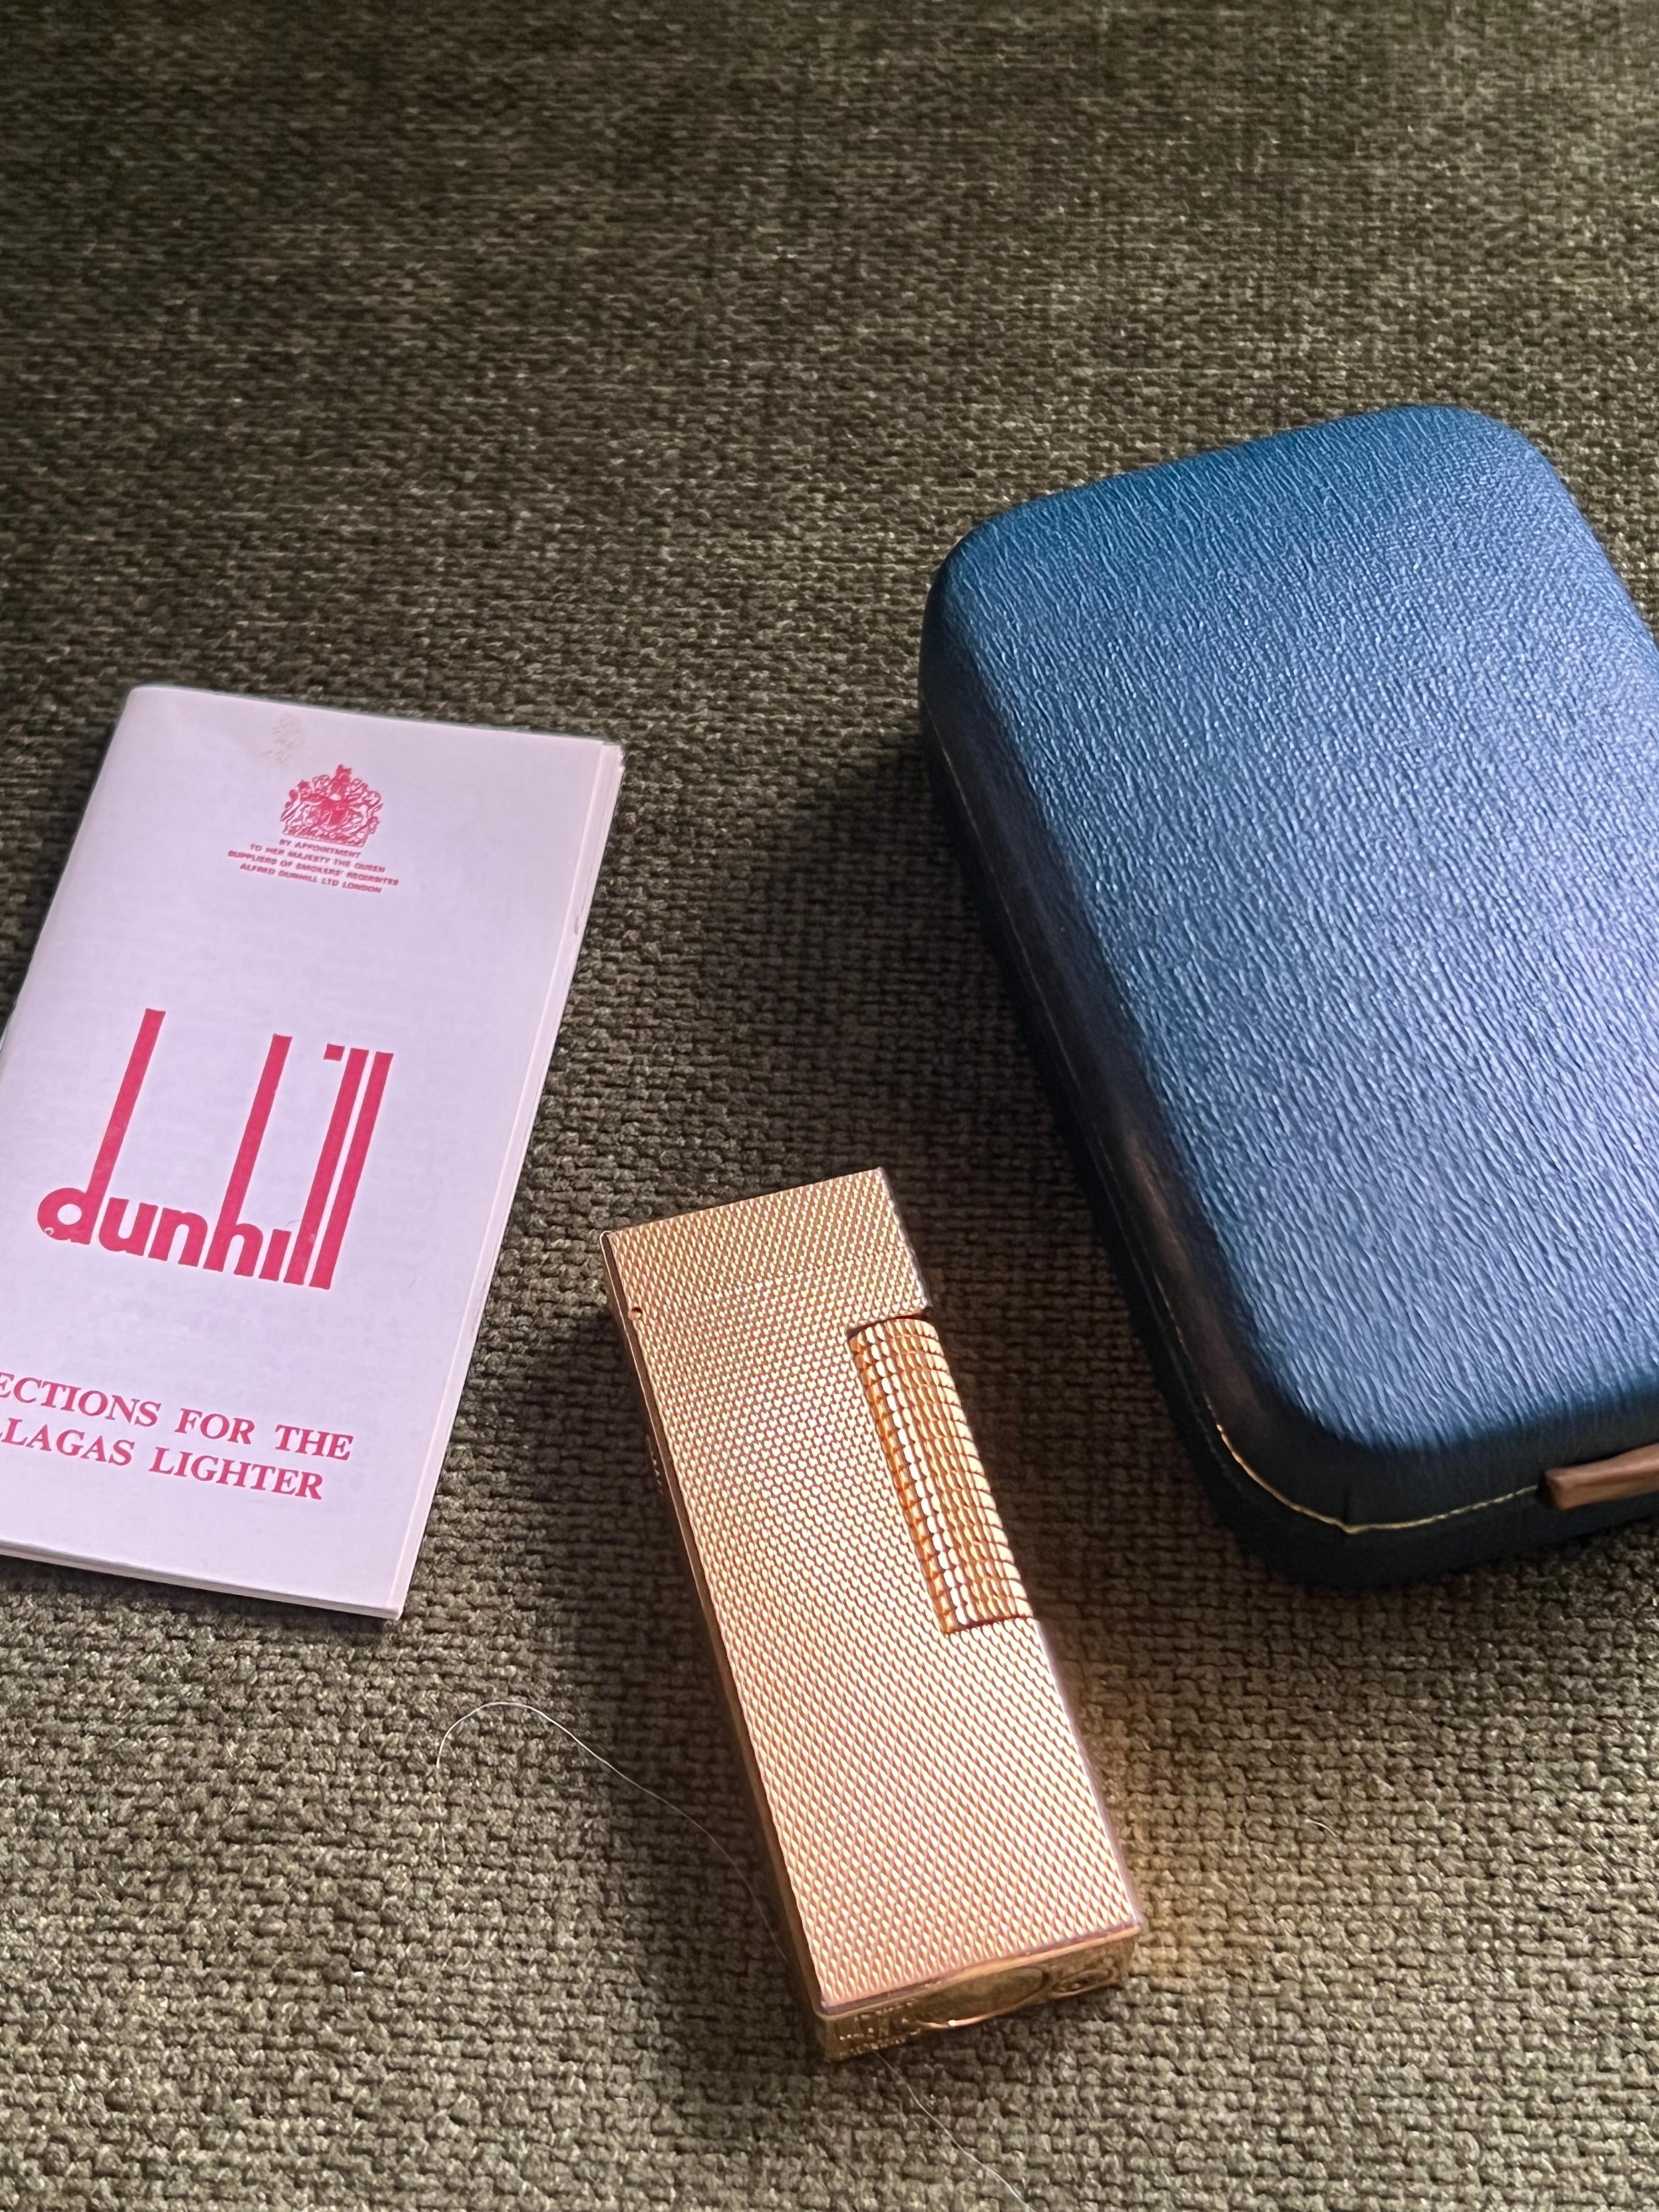 Rare Vintage Dunhill gold plated Swiss Made lighter In mint condition.
Works perfectly. 
Iconic and beautifully engineered piece rare condition, James Bond lighter of choice. 
In original box which is Sky blue. 
Original paper certificate in box.